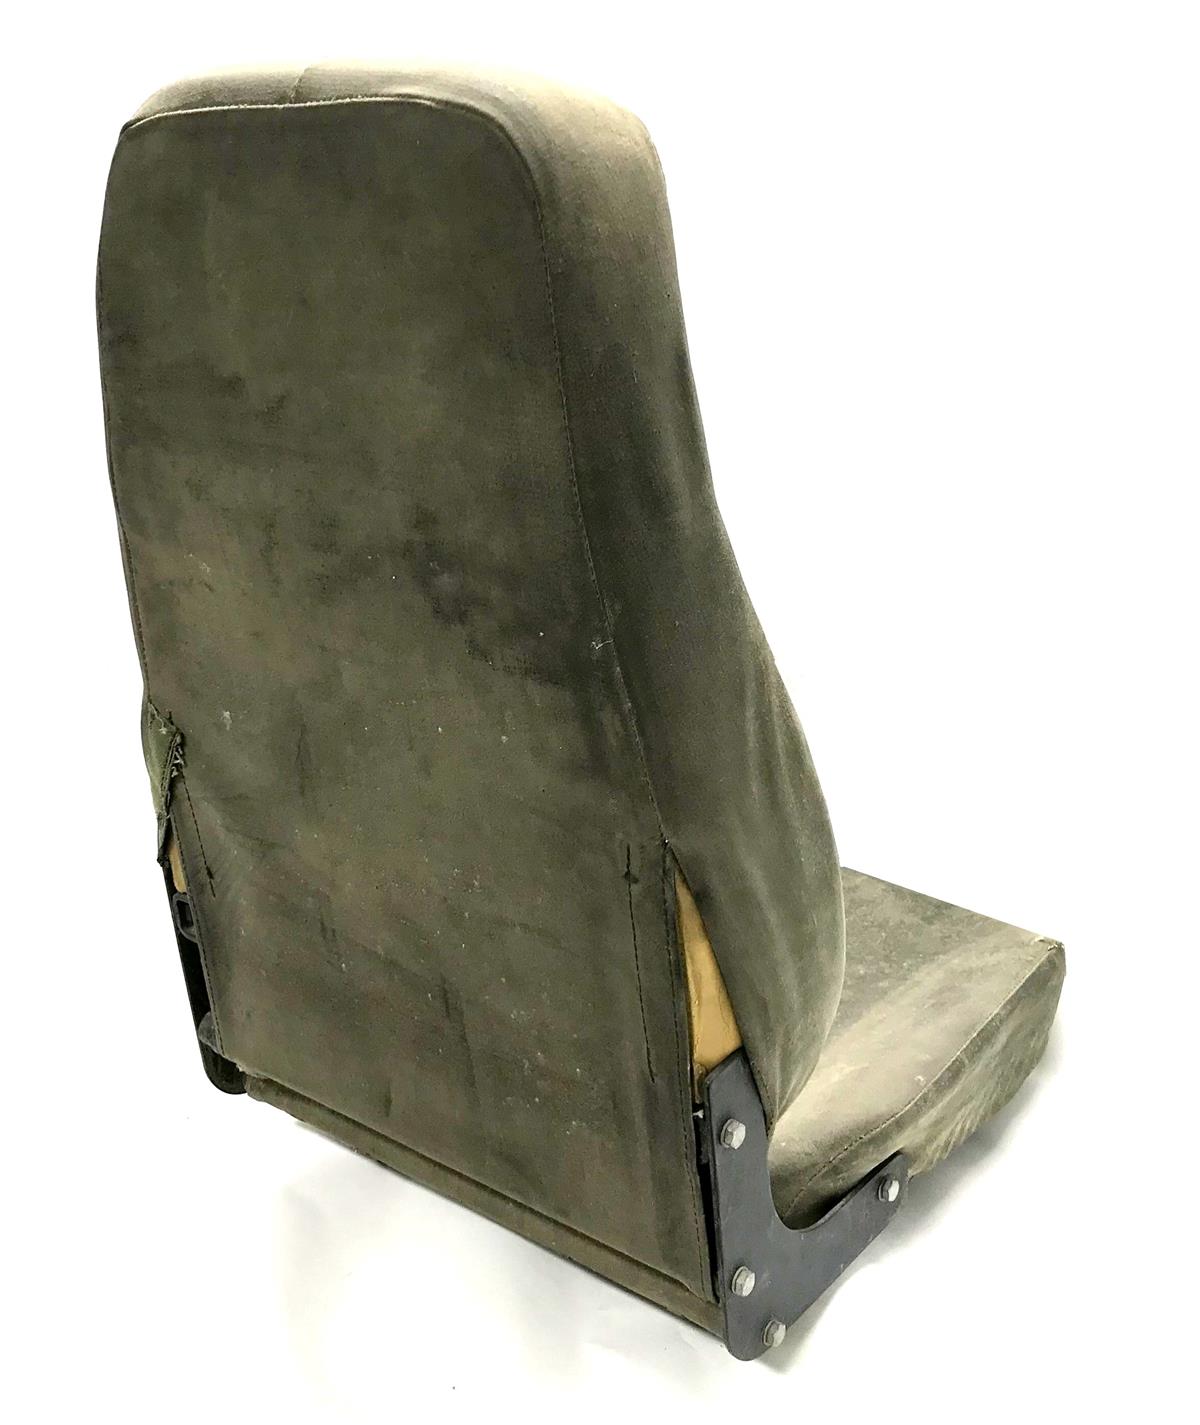 HM-131 | HM-131  HMMWV Seat - Driver Front and Passenger Rear Positions  (8).jpg